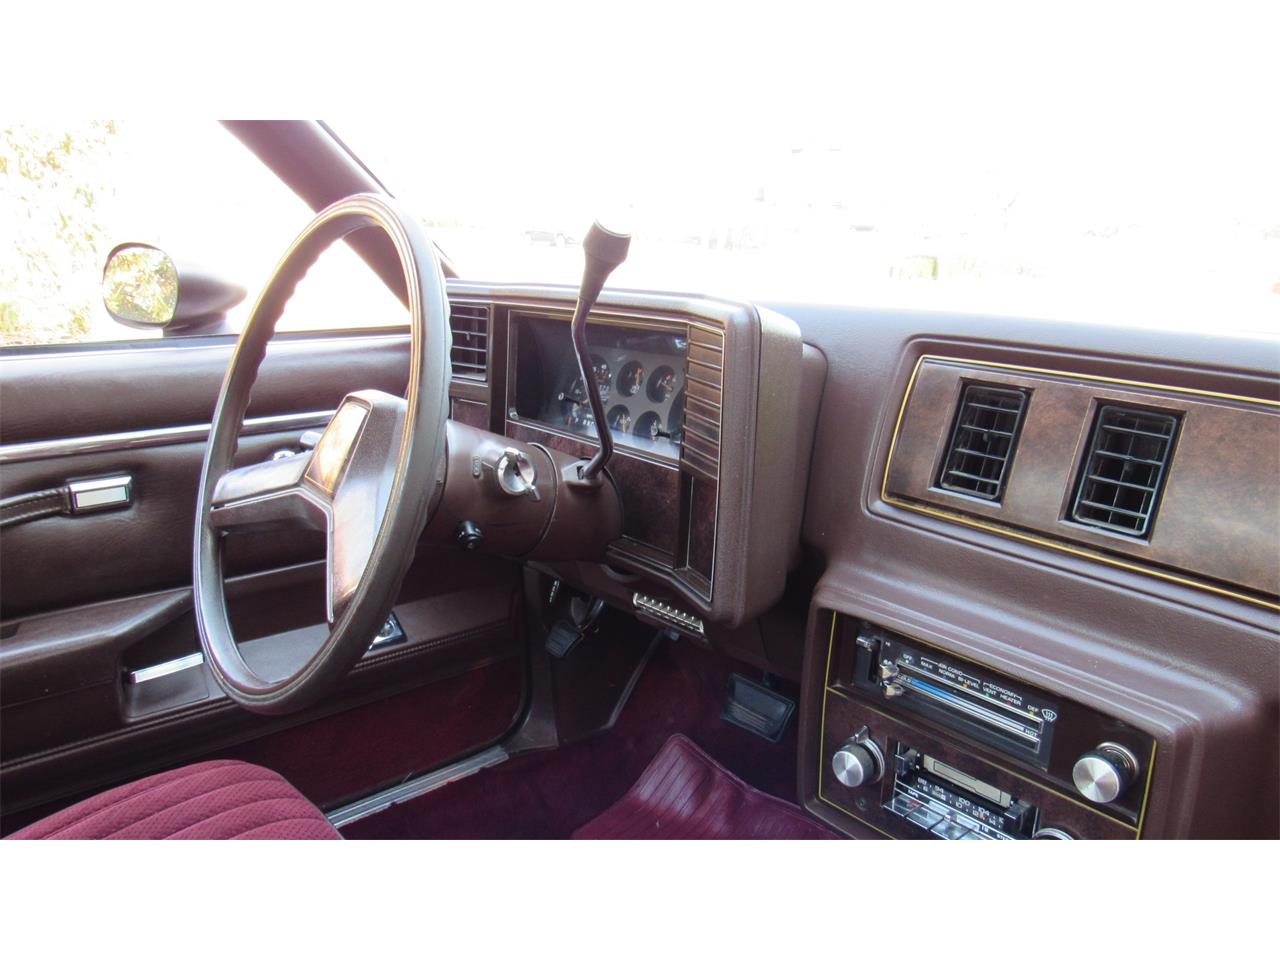 1983 GMC Caballero for sale in Milford, OH – photo 67